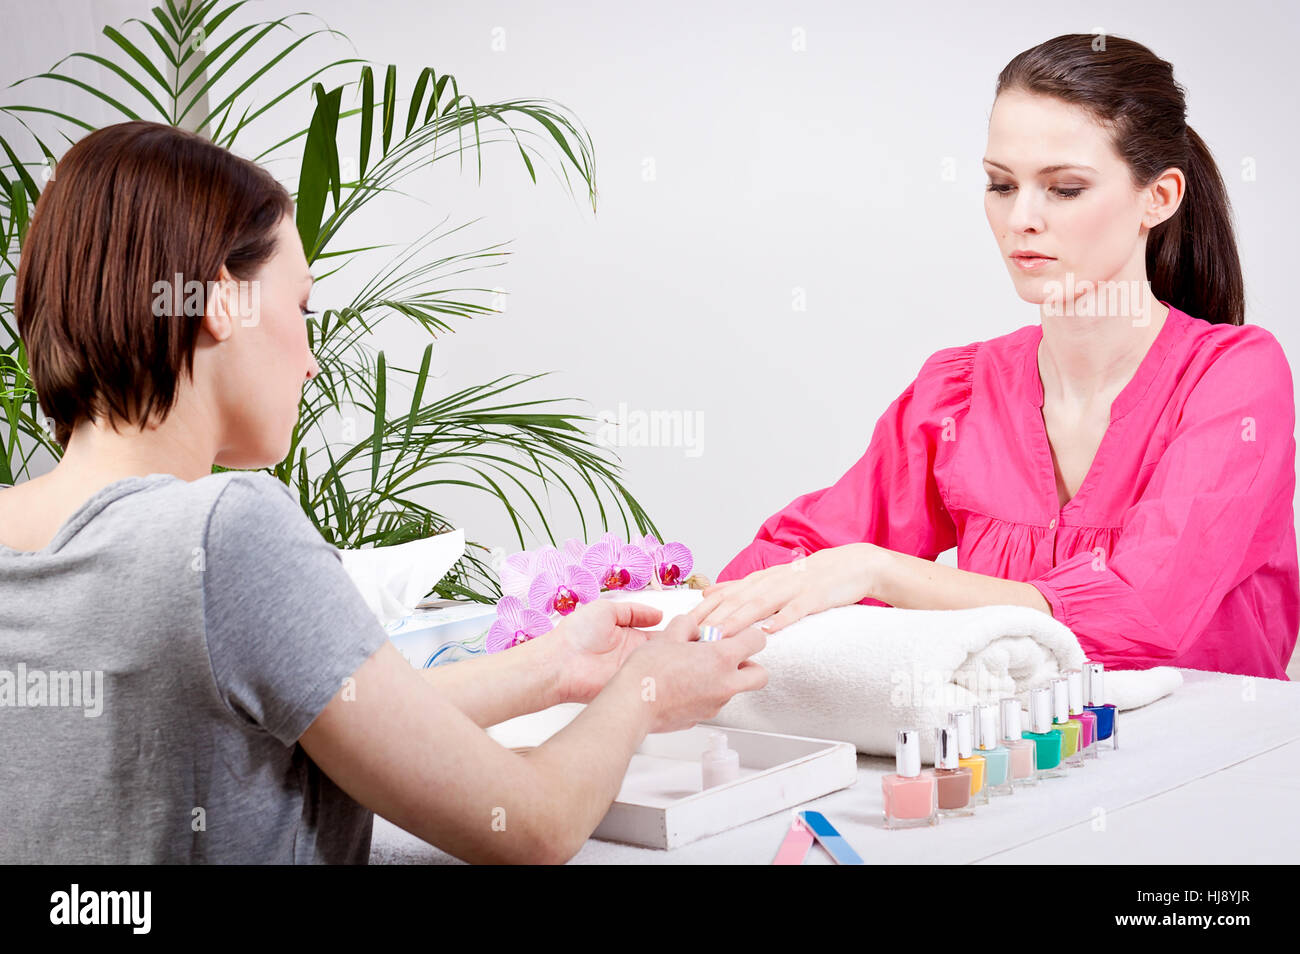 nail salons young woman in nail studio manicure Stock Photo